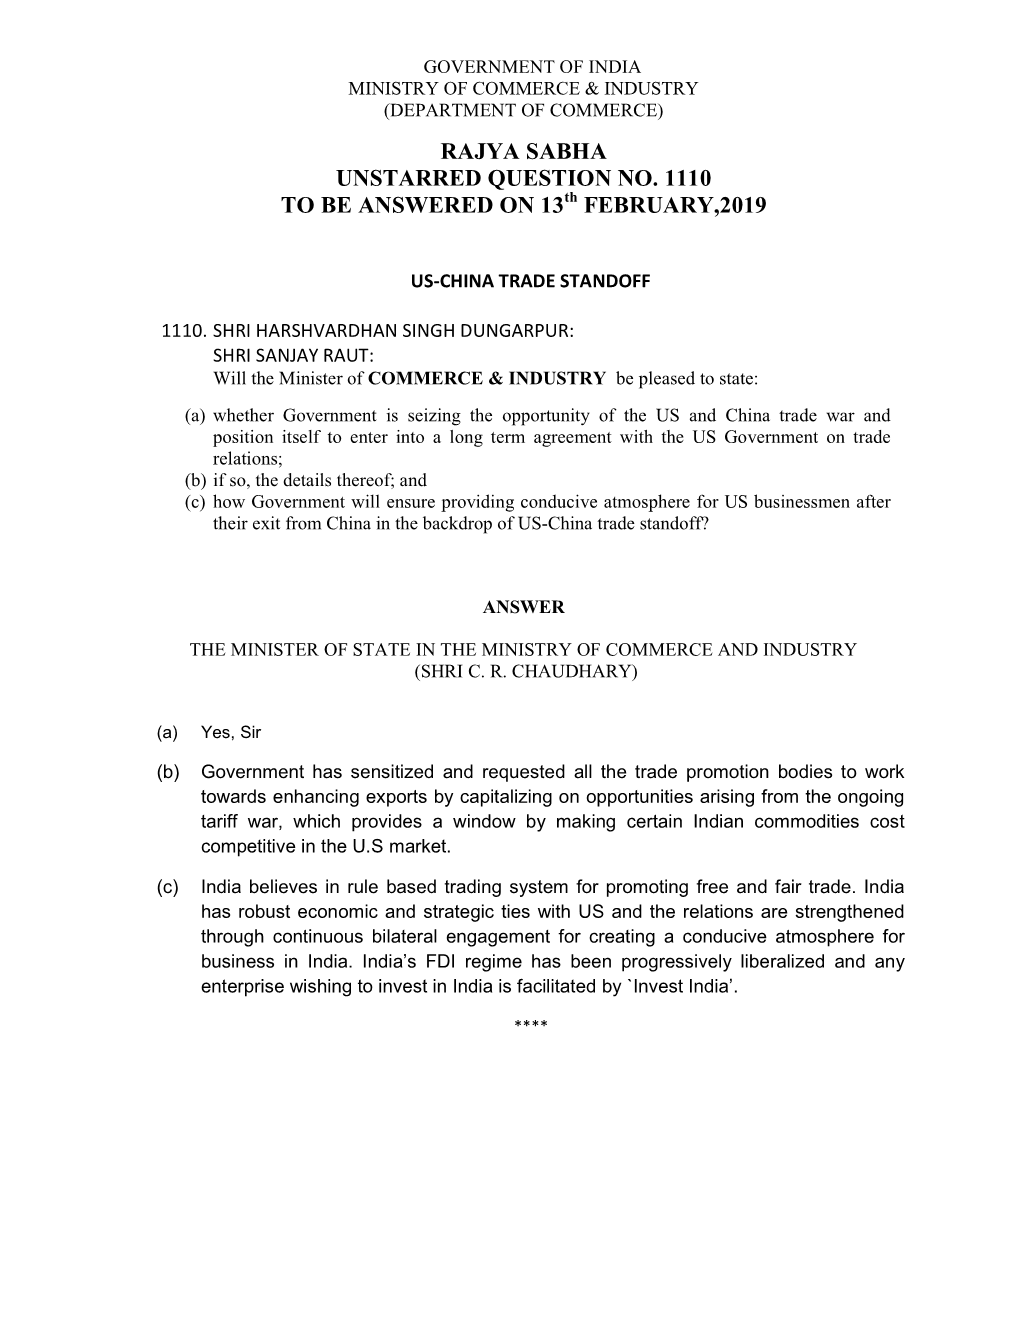 RAJYA SABHA UNSTARRED QUESTION NO. 1110 to BE ANSWERED on 13Th FEBRUARY,2019